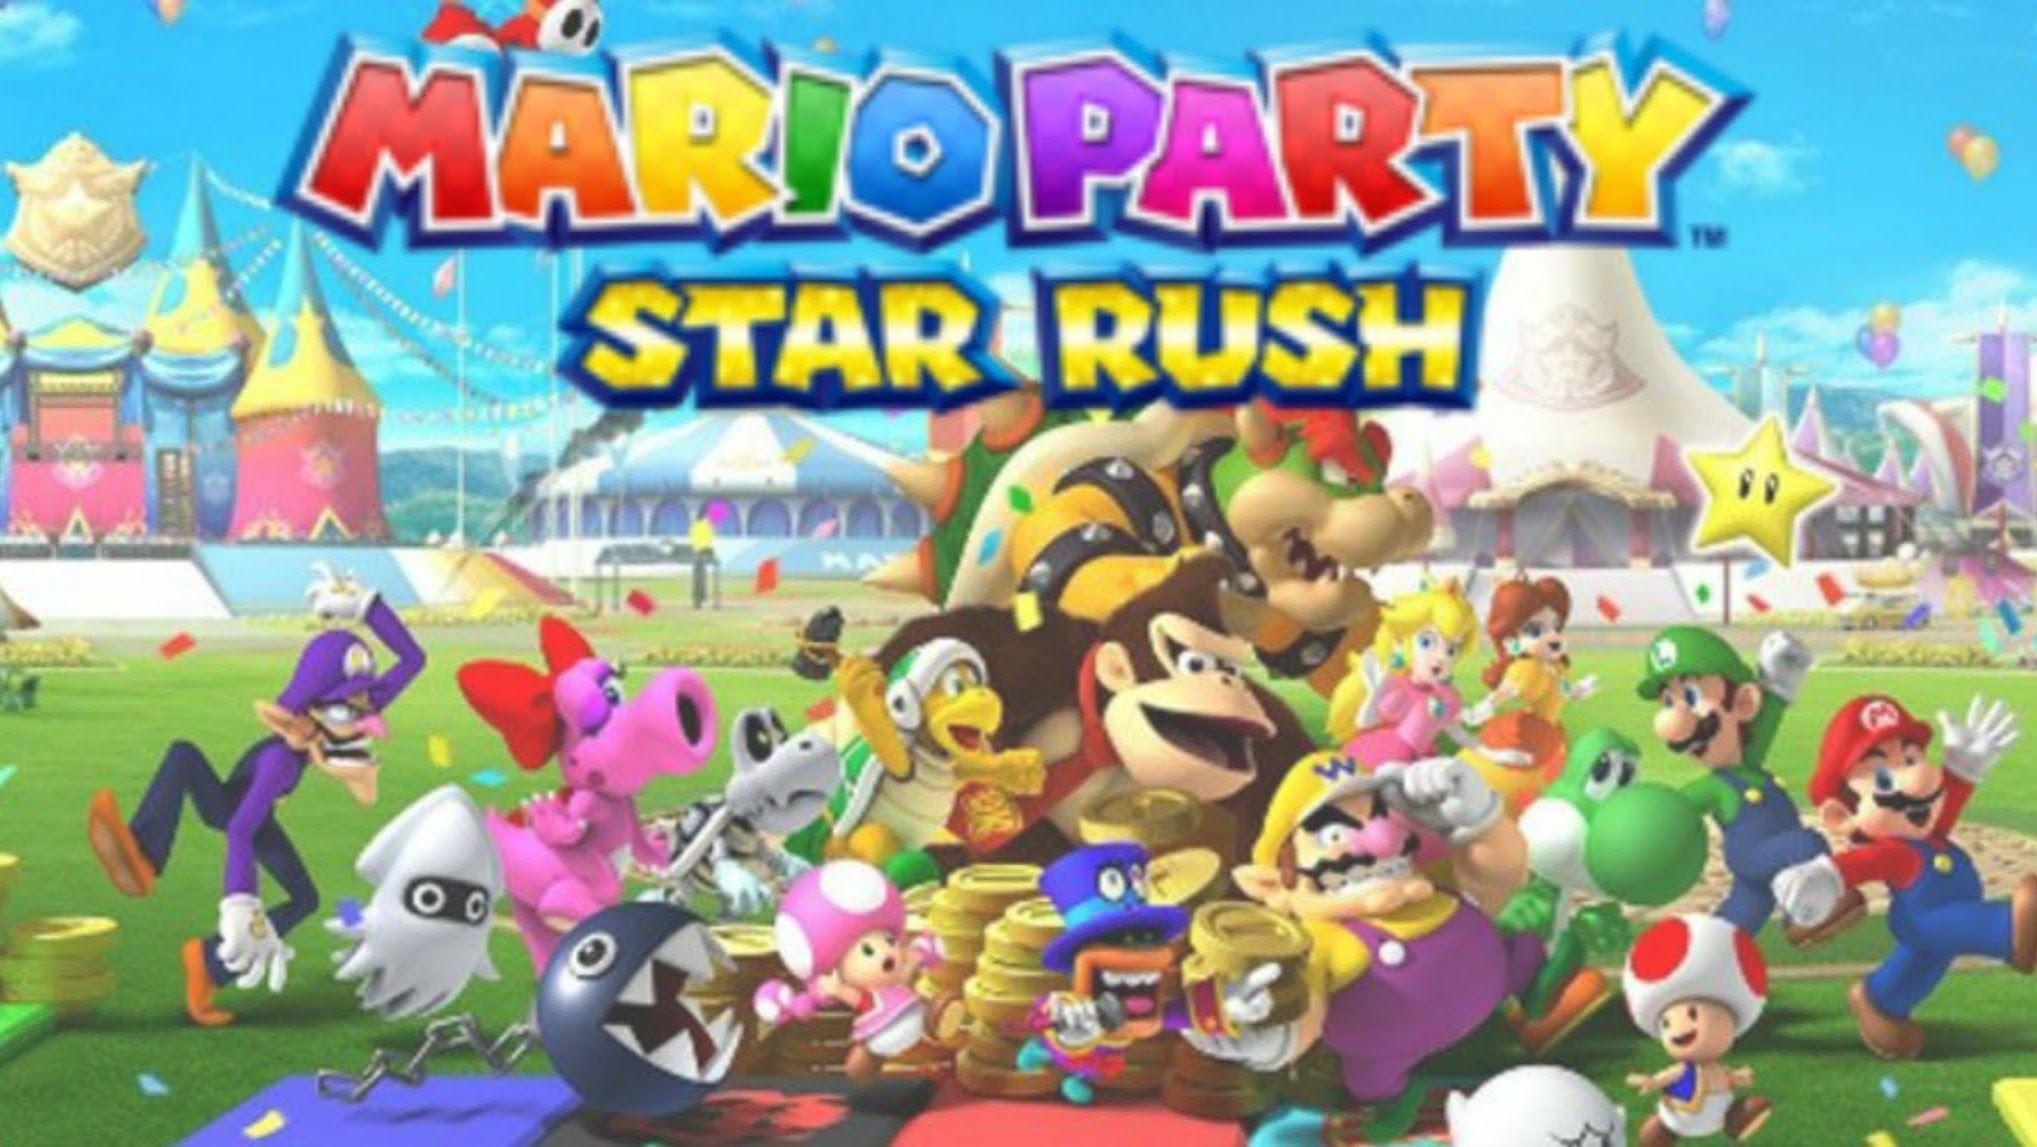 BigMarioFan100's Live Event Mario Party Star Rush Discussion